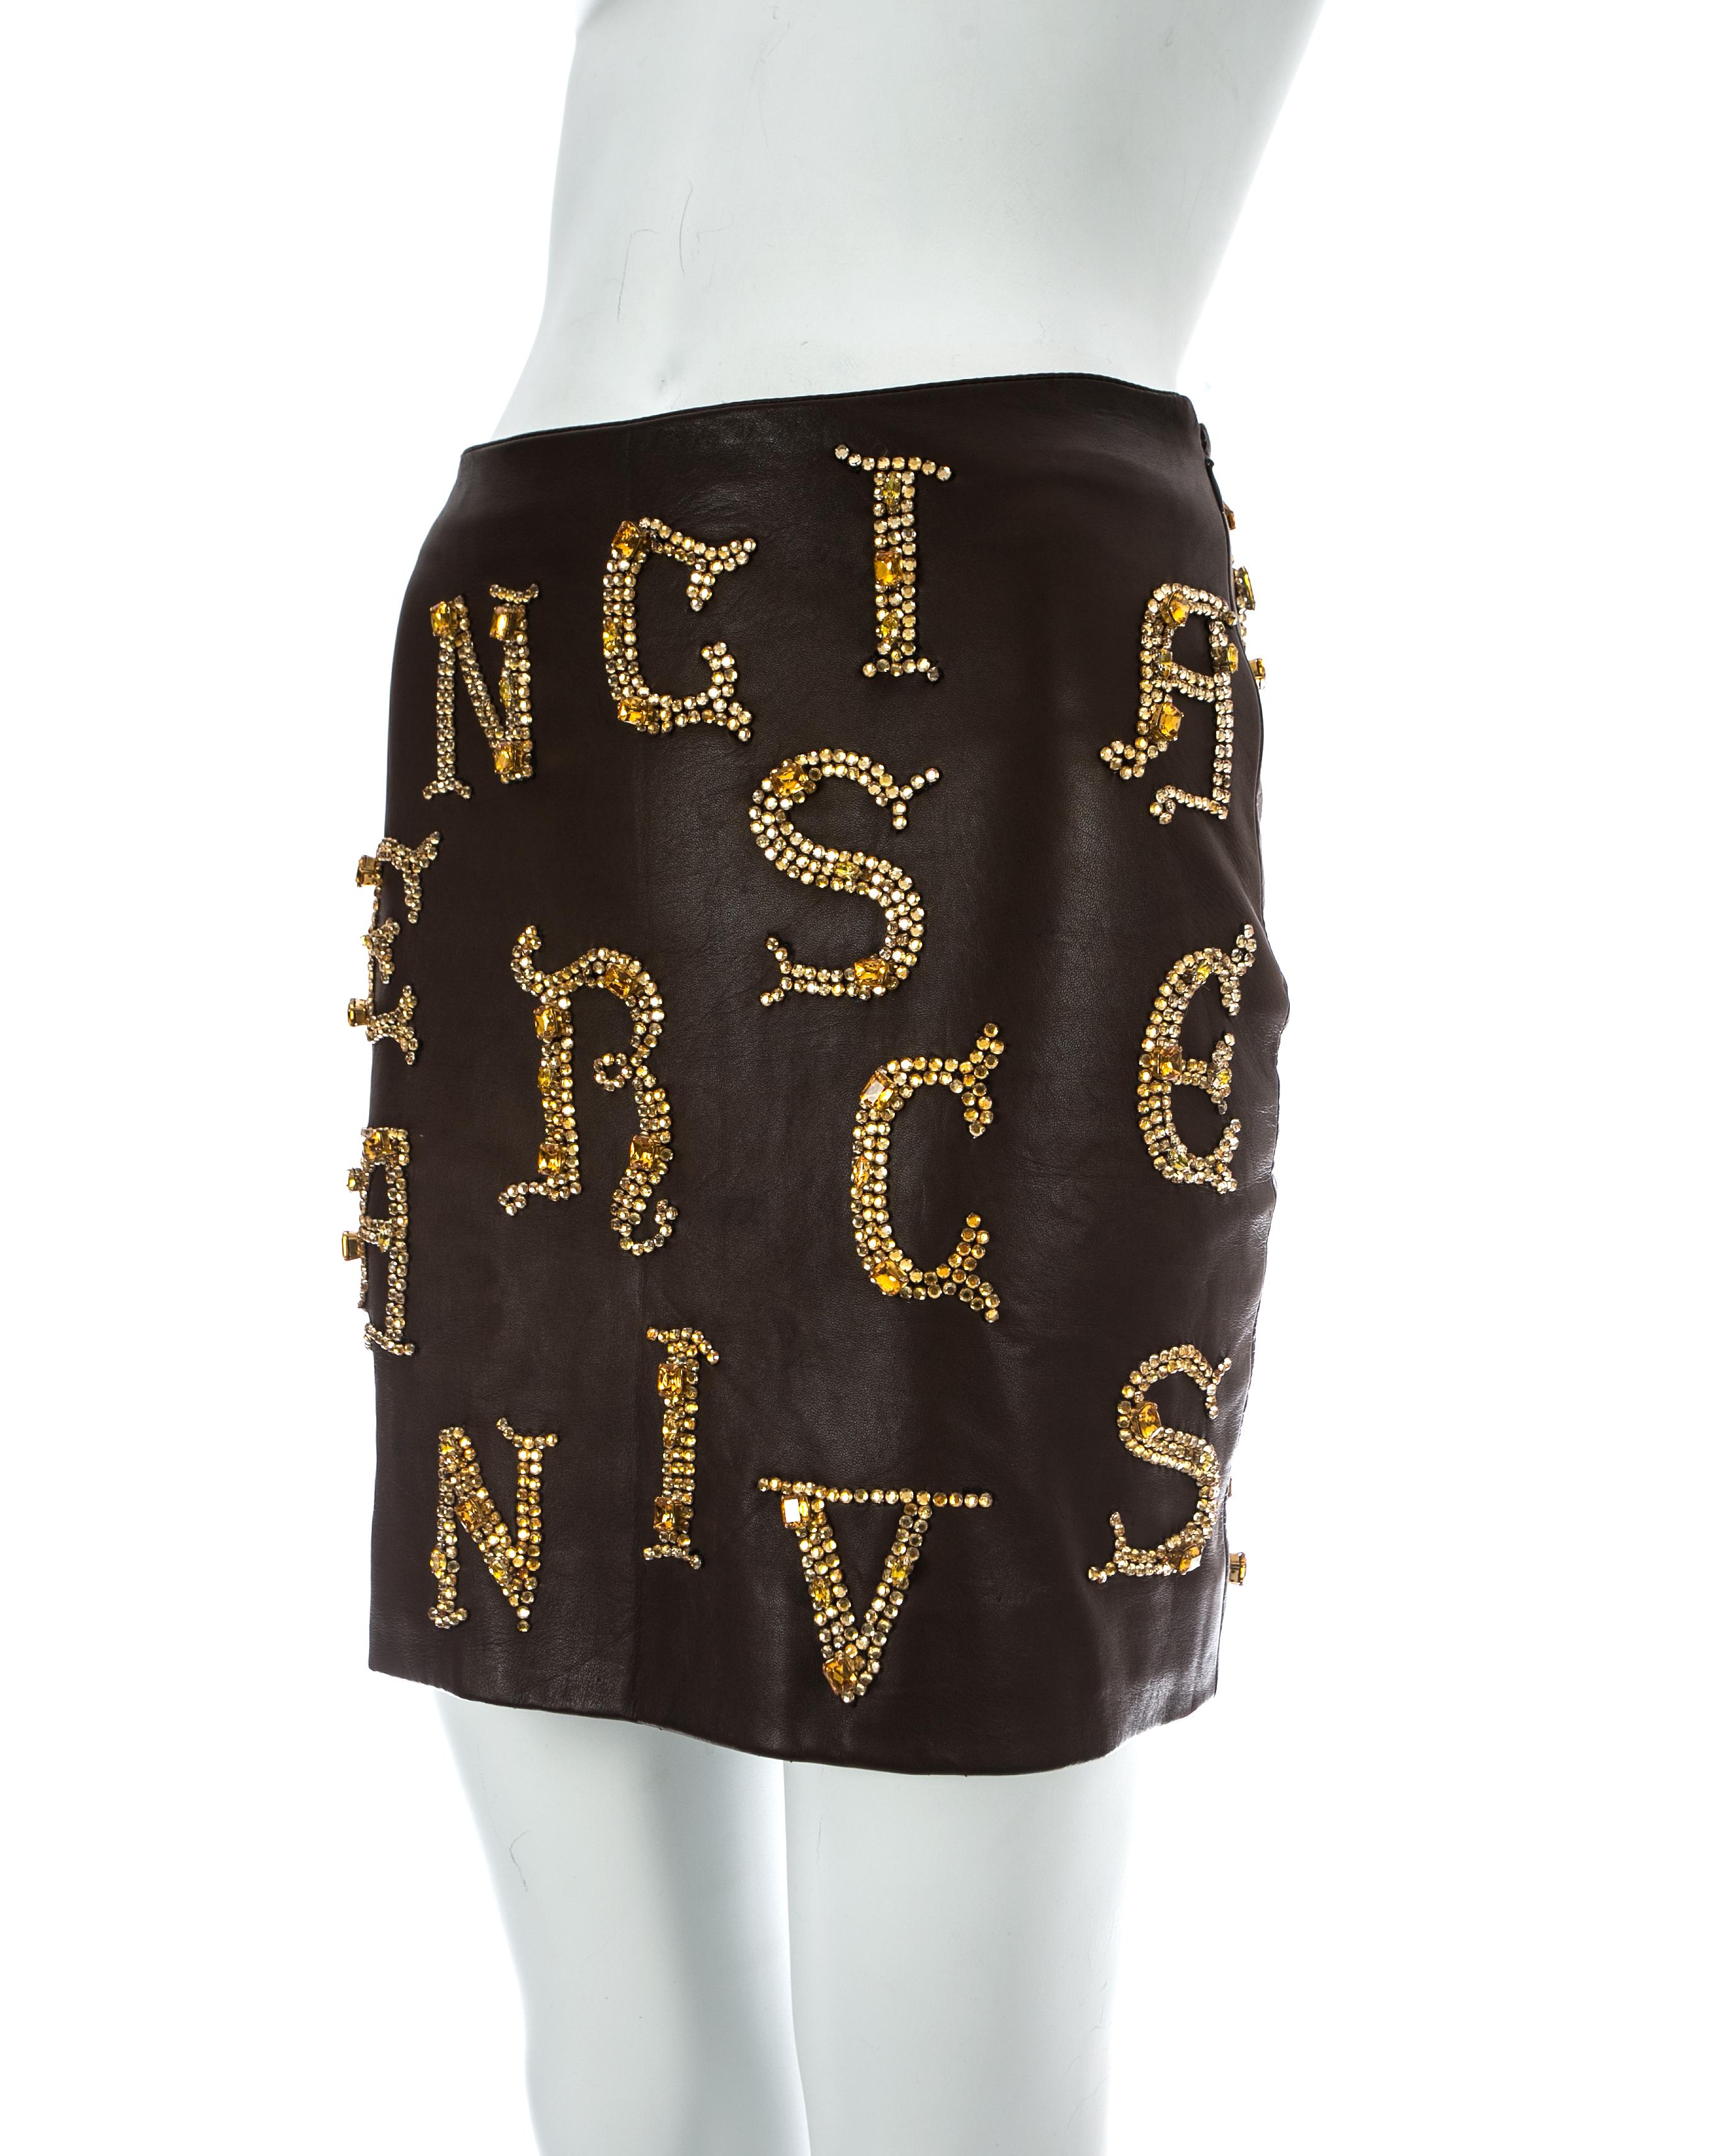 Gianni Versace brown leather skirt with gold crystal embellishment, fw 1997 For Sale 1